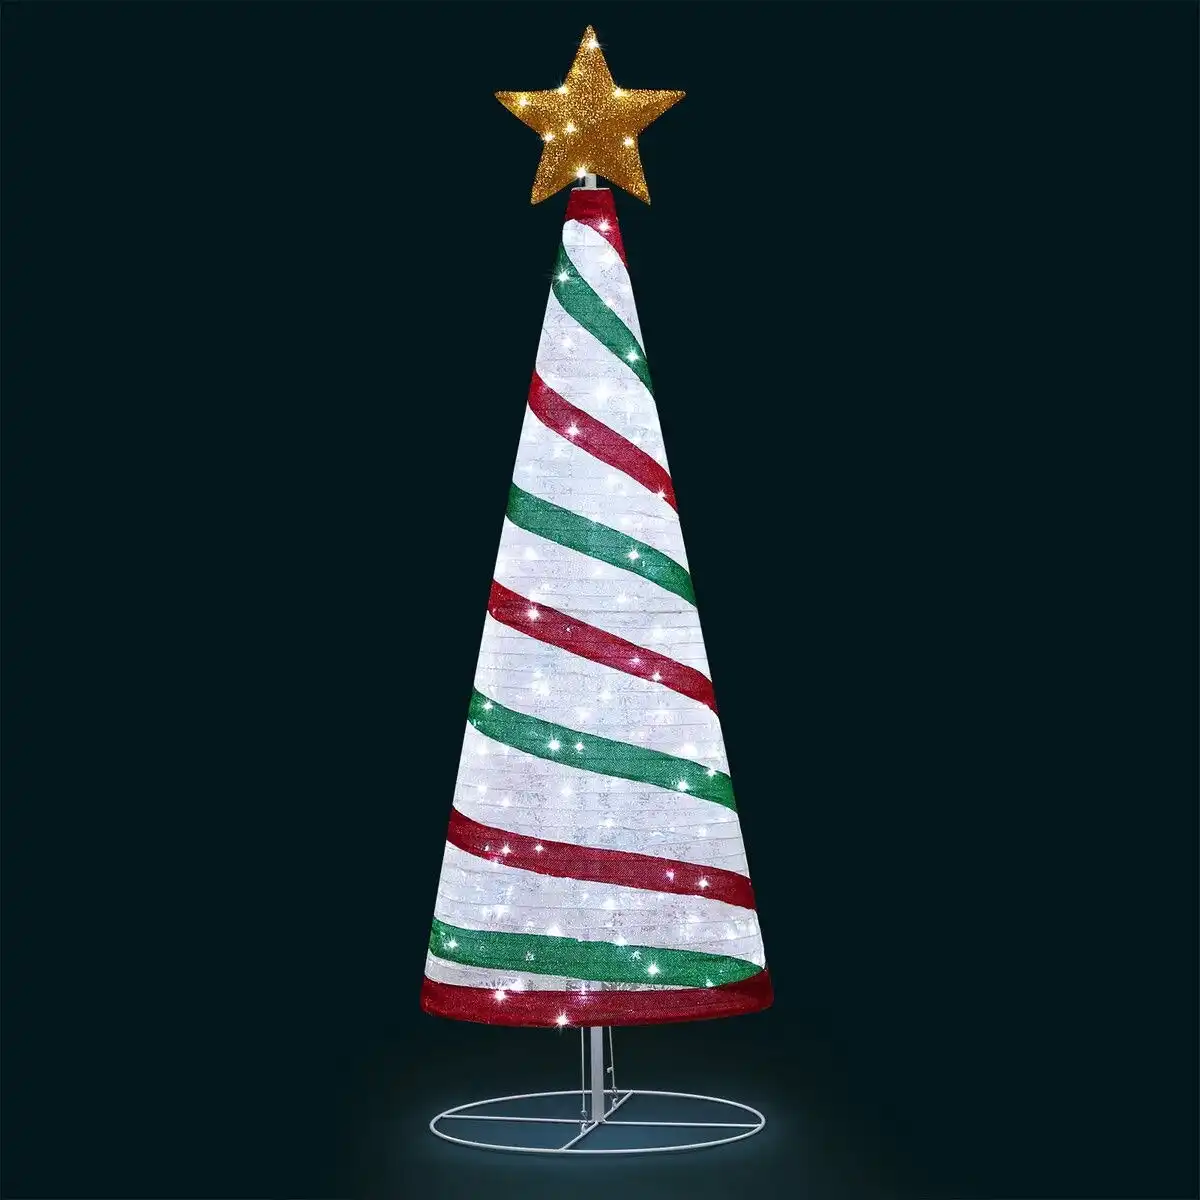 Solight 180cm Ribbon Christmas Tree Light Decoration LED Strip Ornaments Xmas Home Outdoor Display Folding Star Topper 8 Flickering Effects